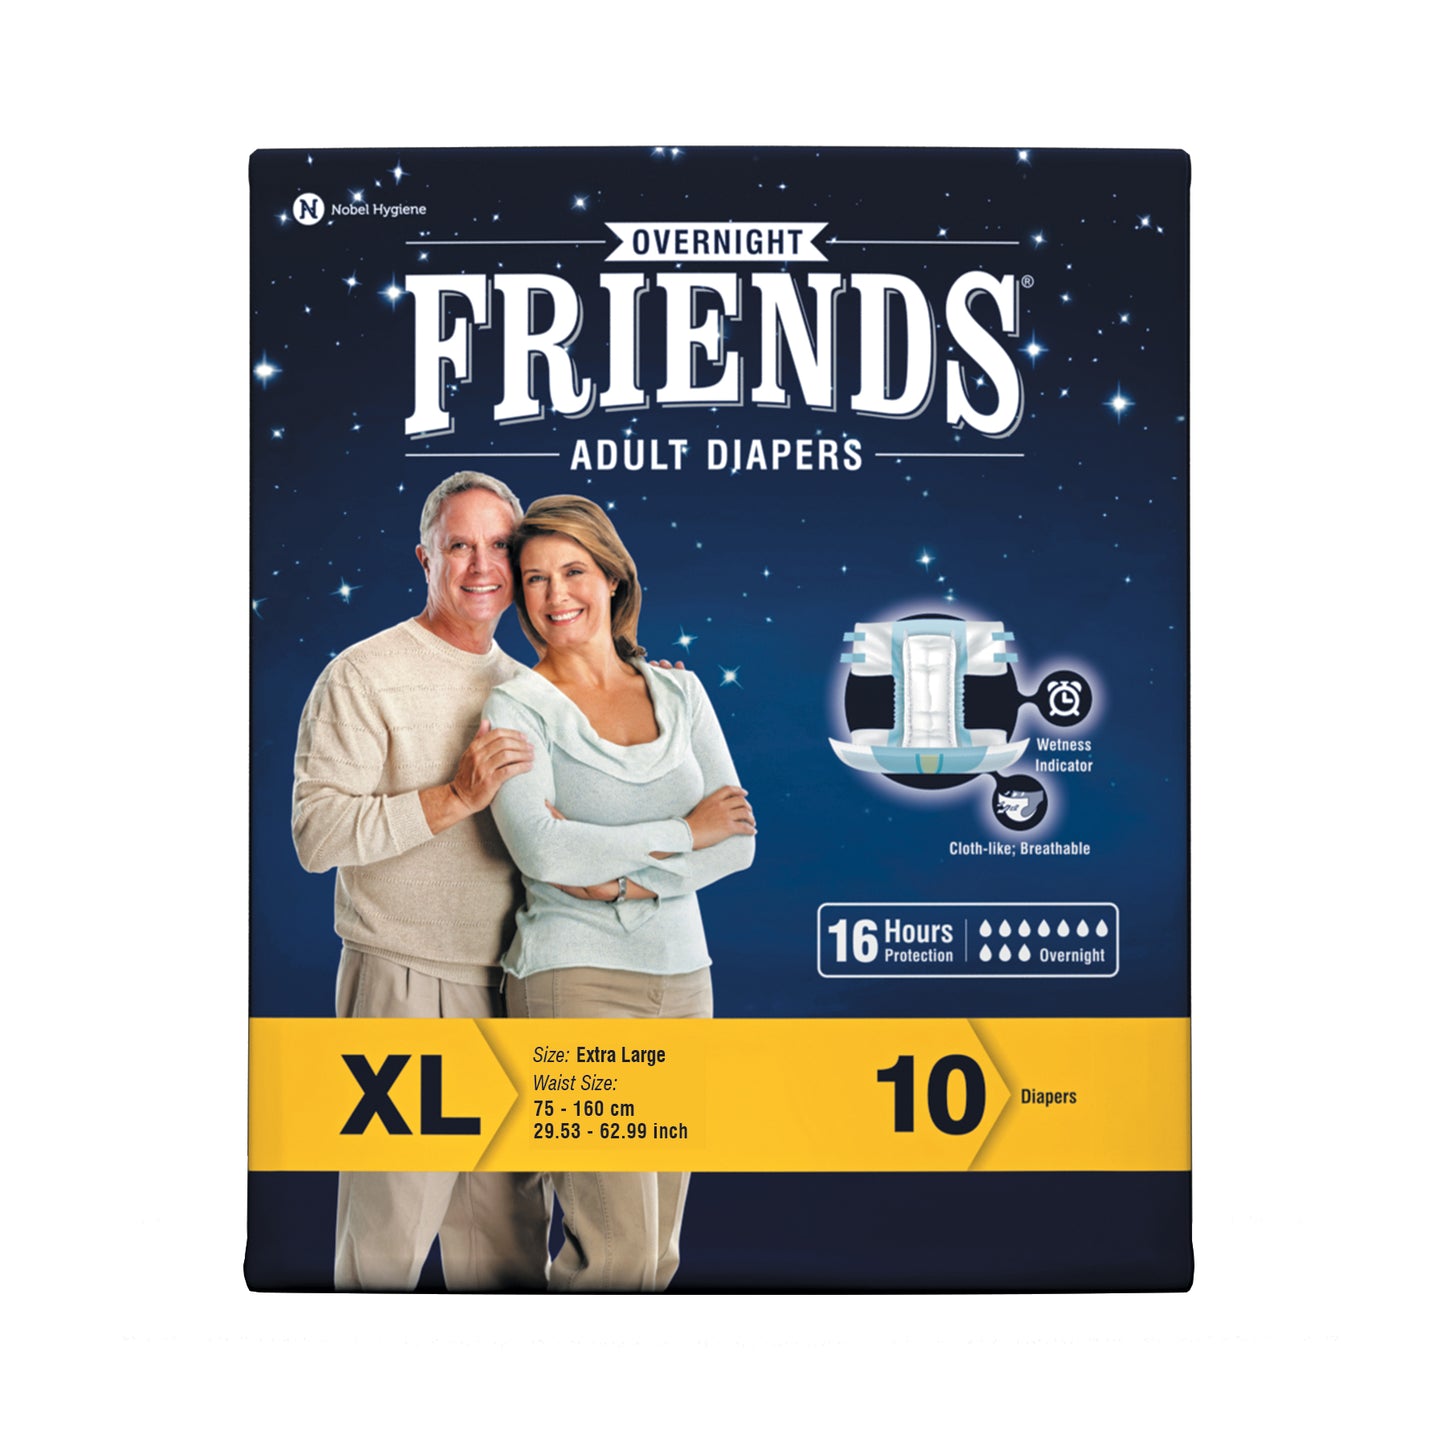 FRIENDS ADULT DIAPERS OVERNIGHT 10's × 8 C